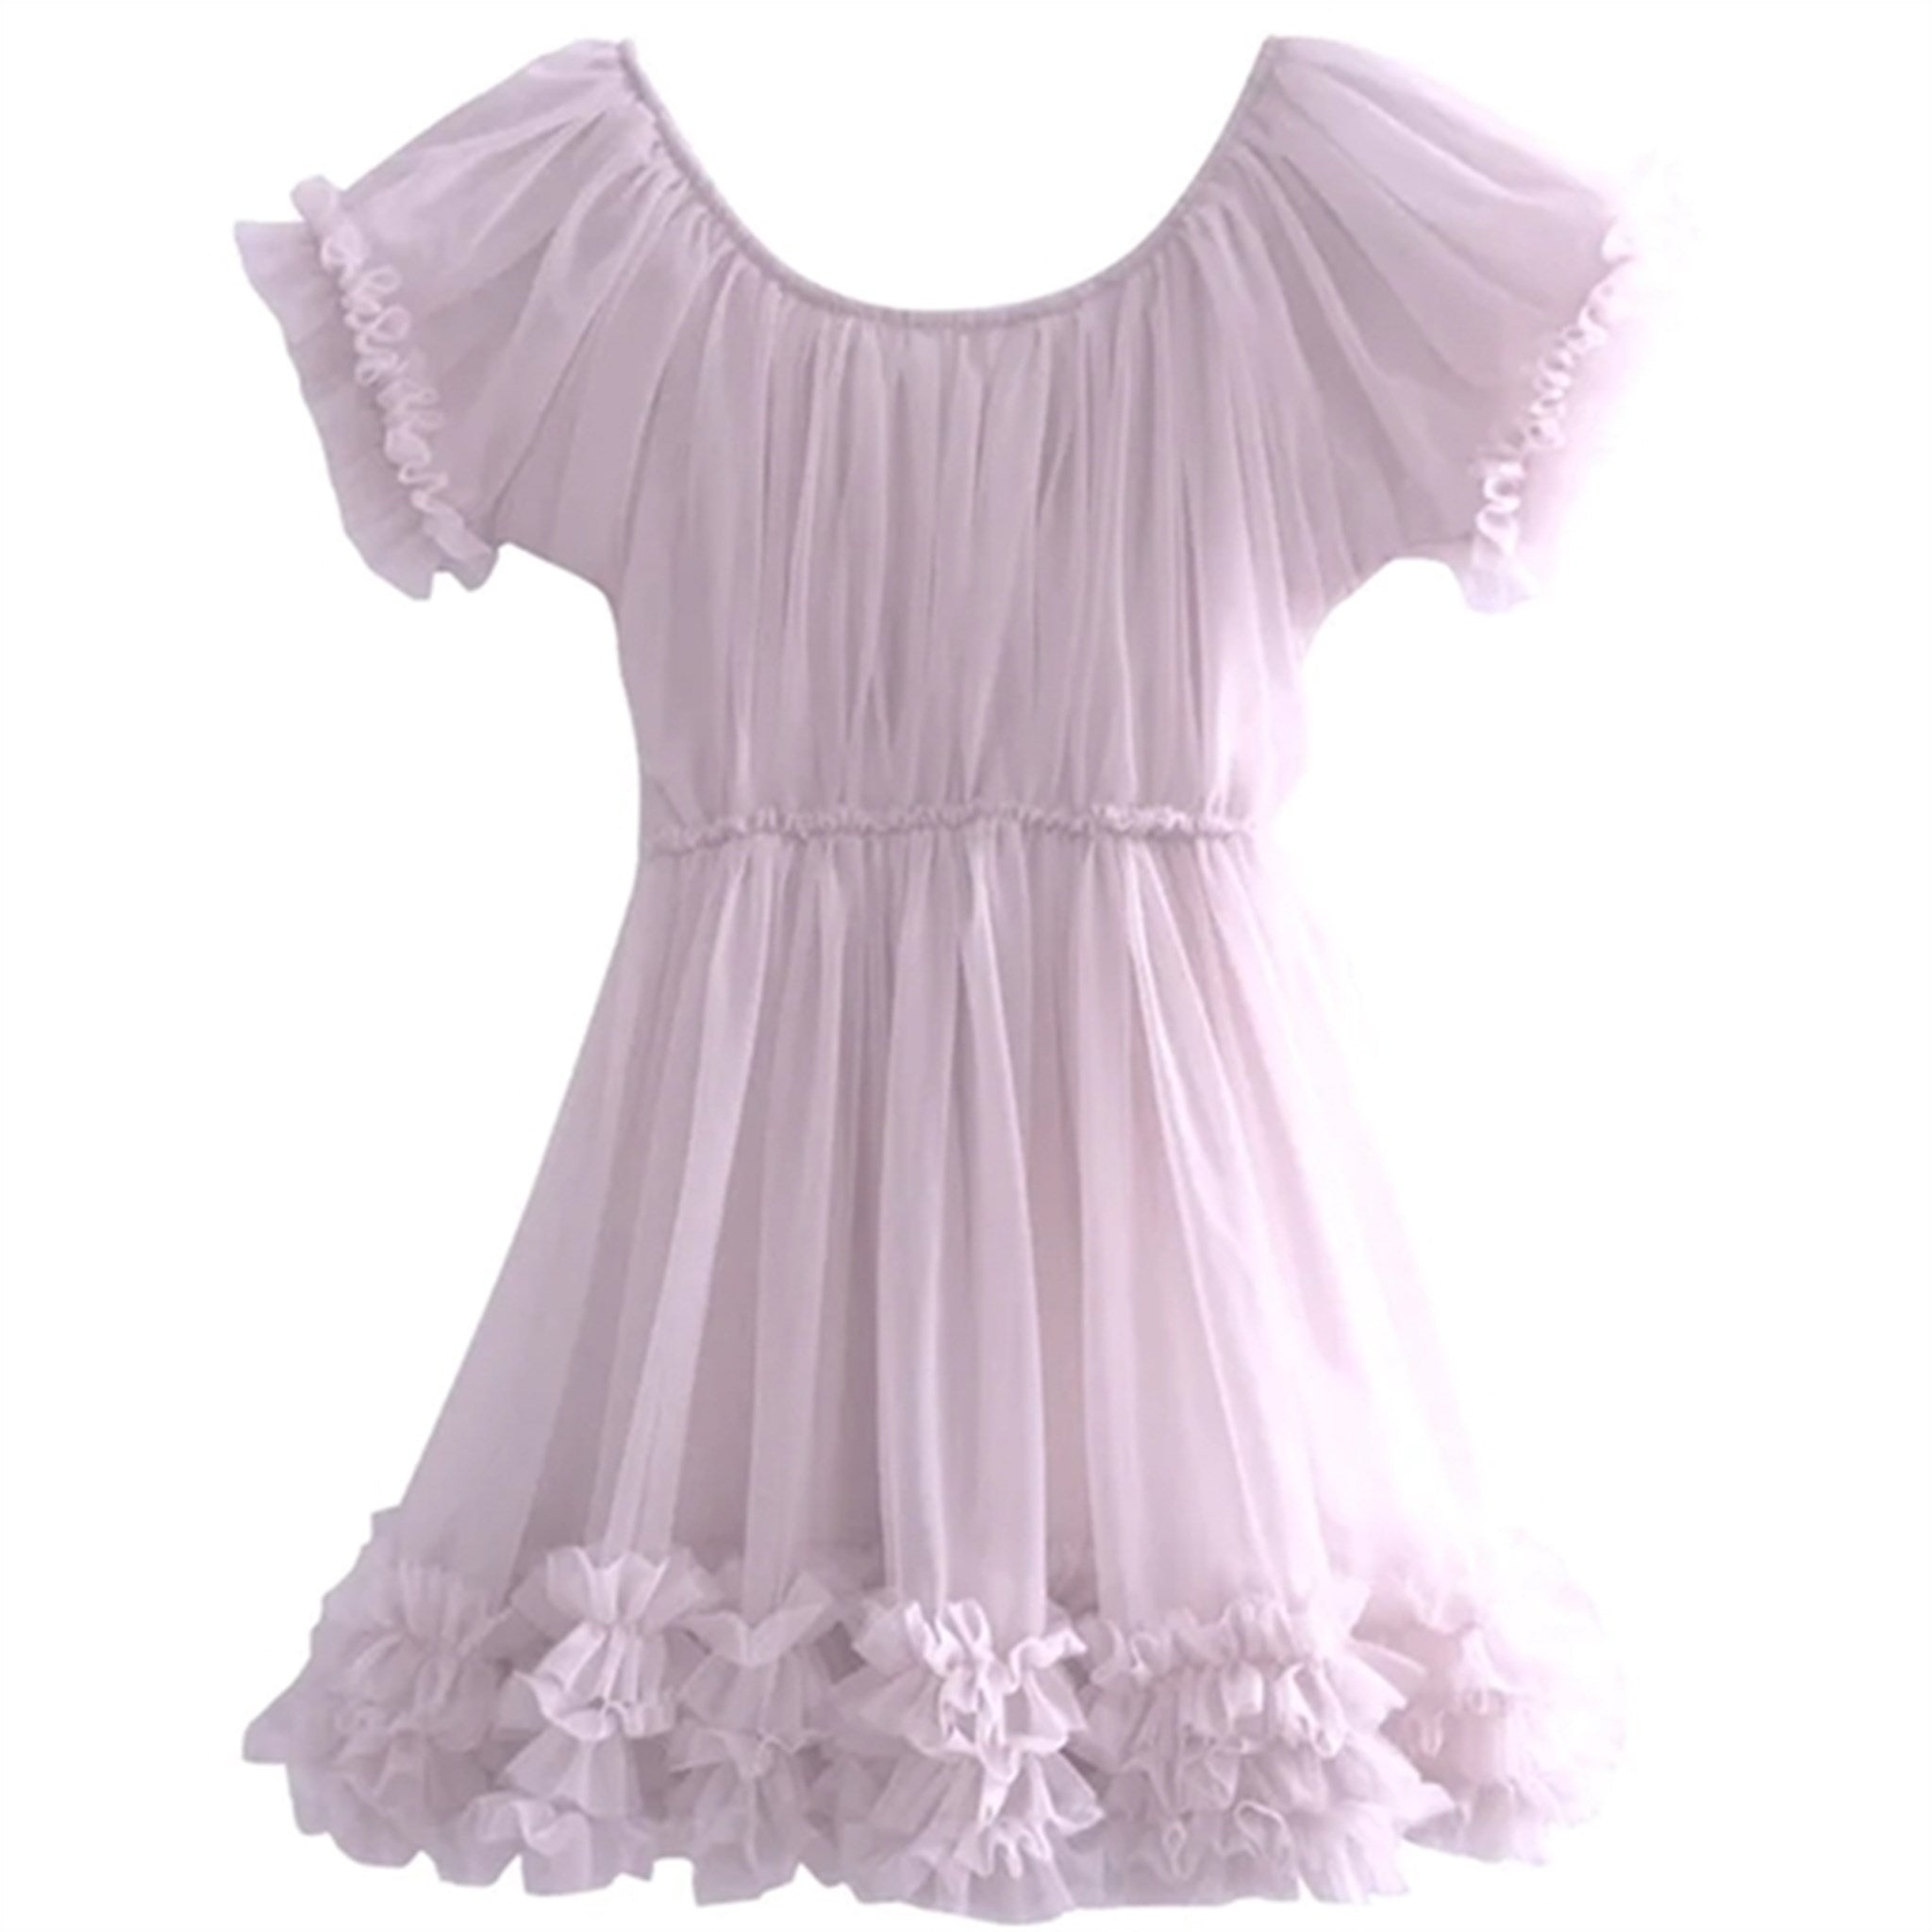 Dolly by Le Petit Frilly Klänning Lavender